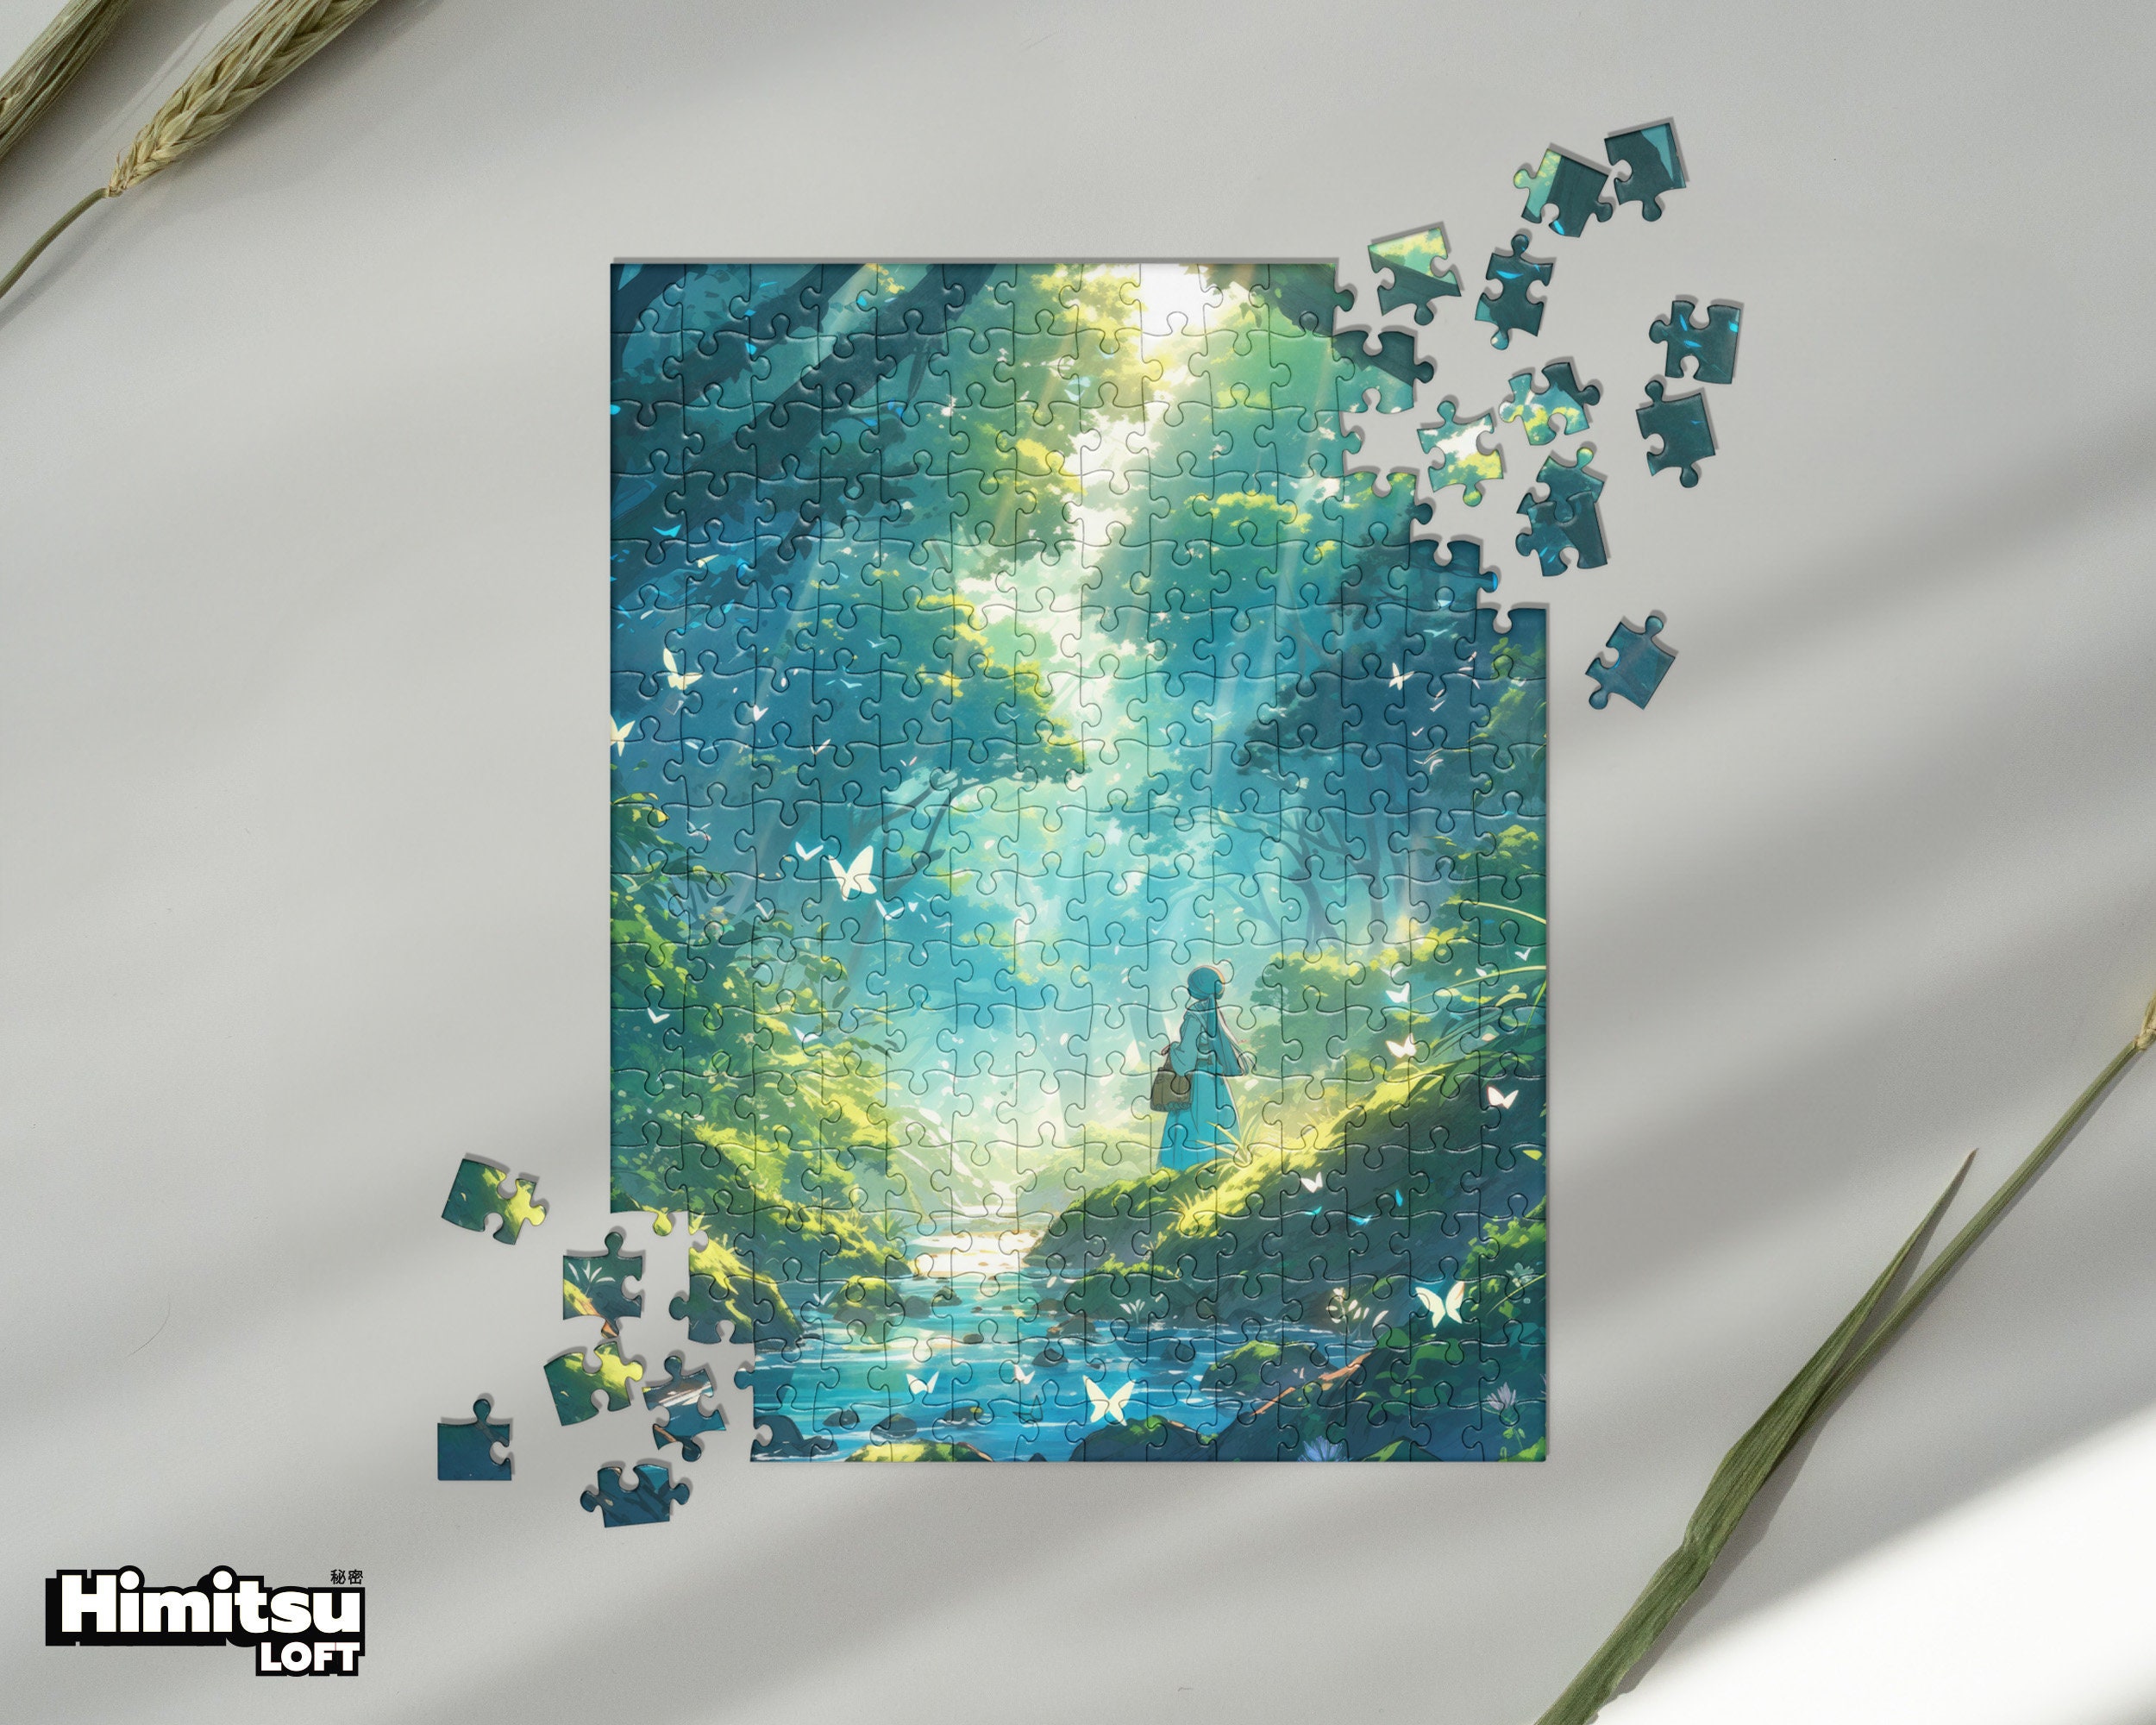 anime girls, gifts for anime lovers Jigsaw Puzzle for Sale by